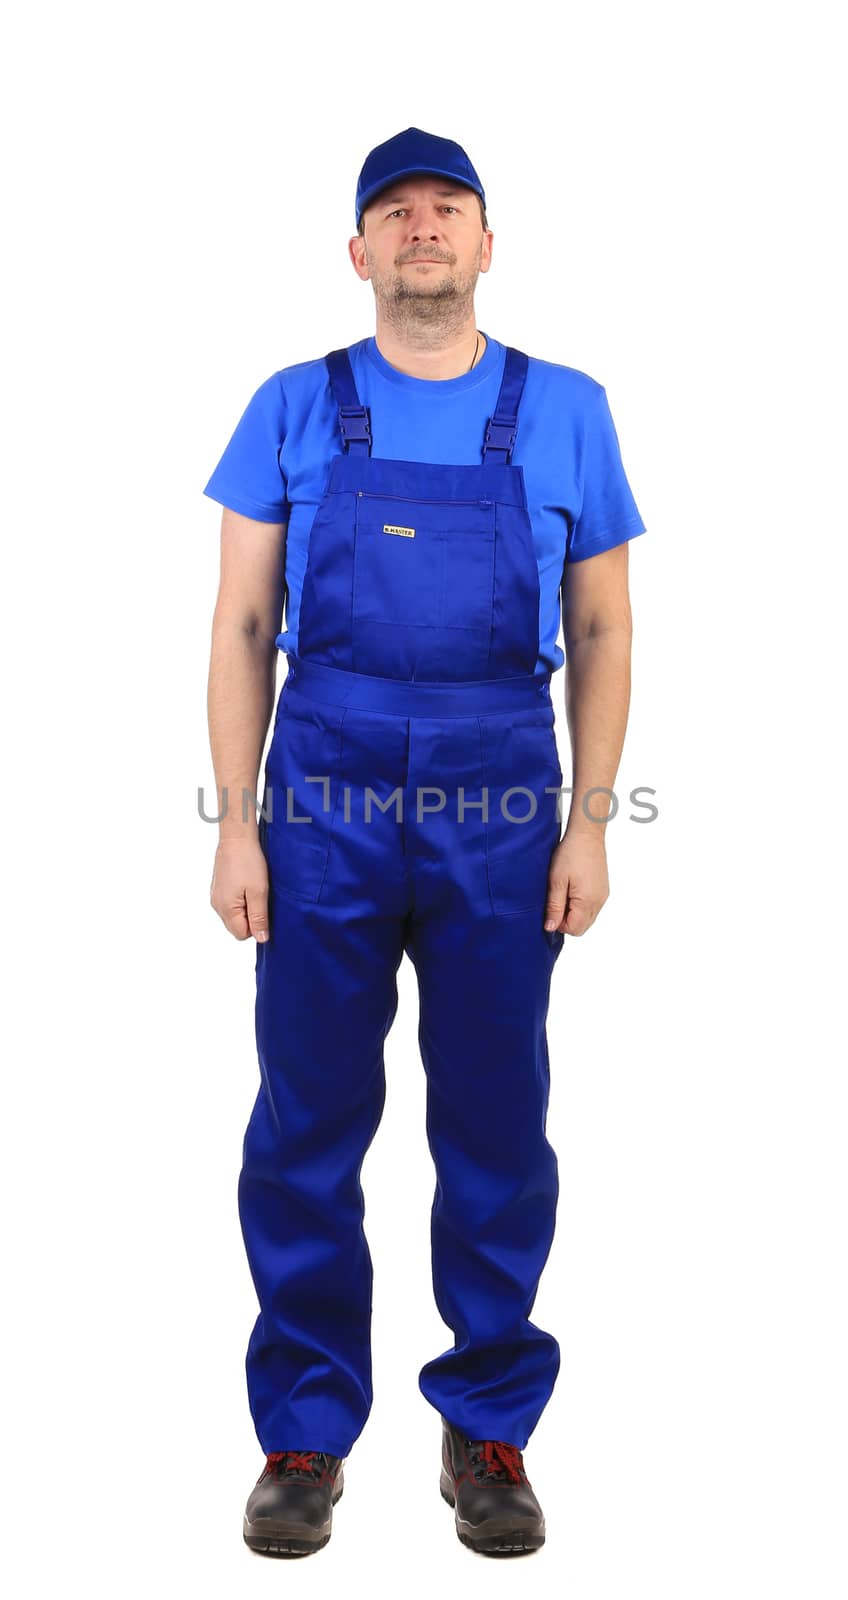 Worker in blue overalls. Isolated on a white background.